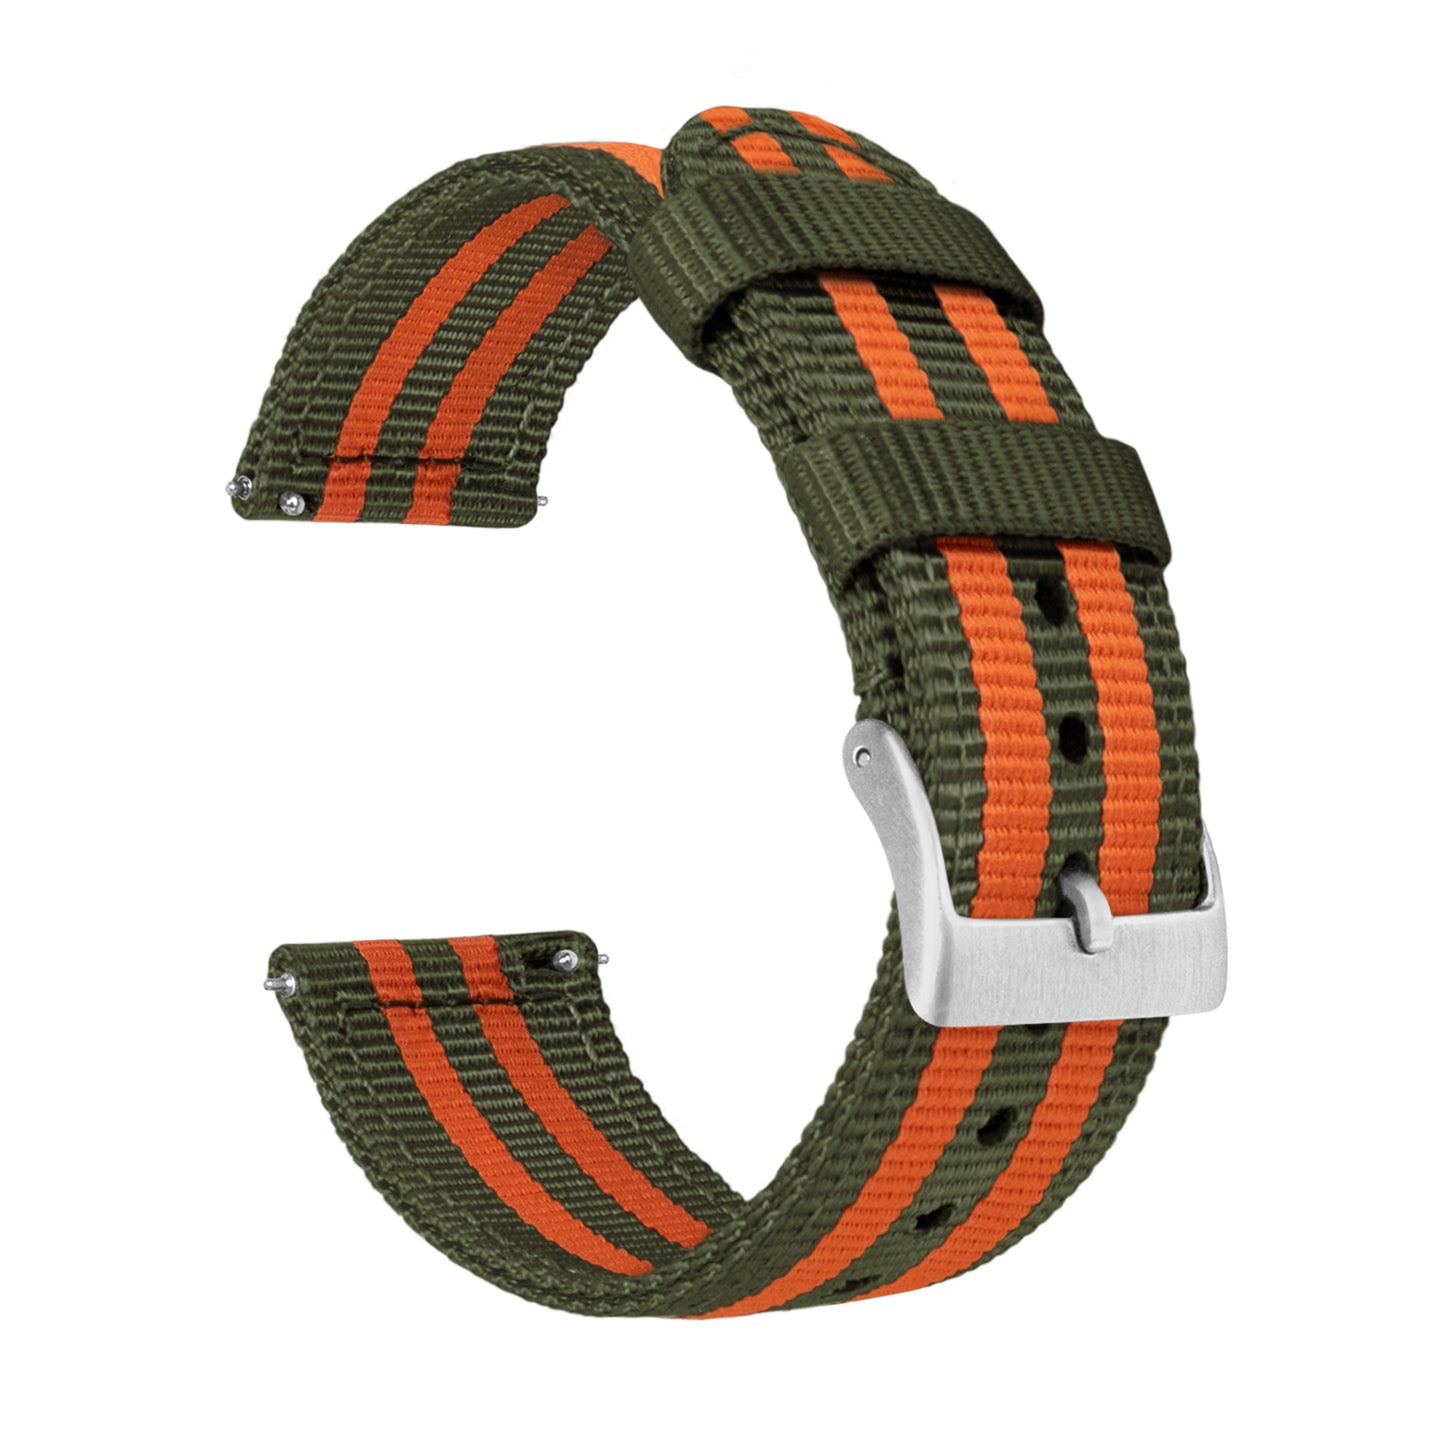 Fossil Sport | Two-Piece NATO Style | Army Green & Orange - Barton Watch Bands